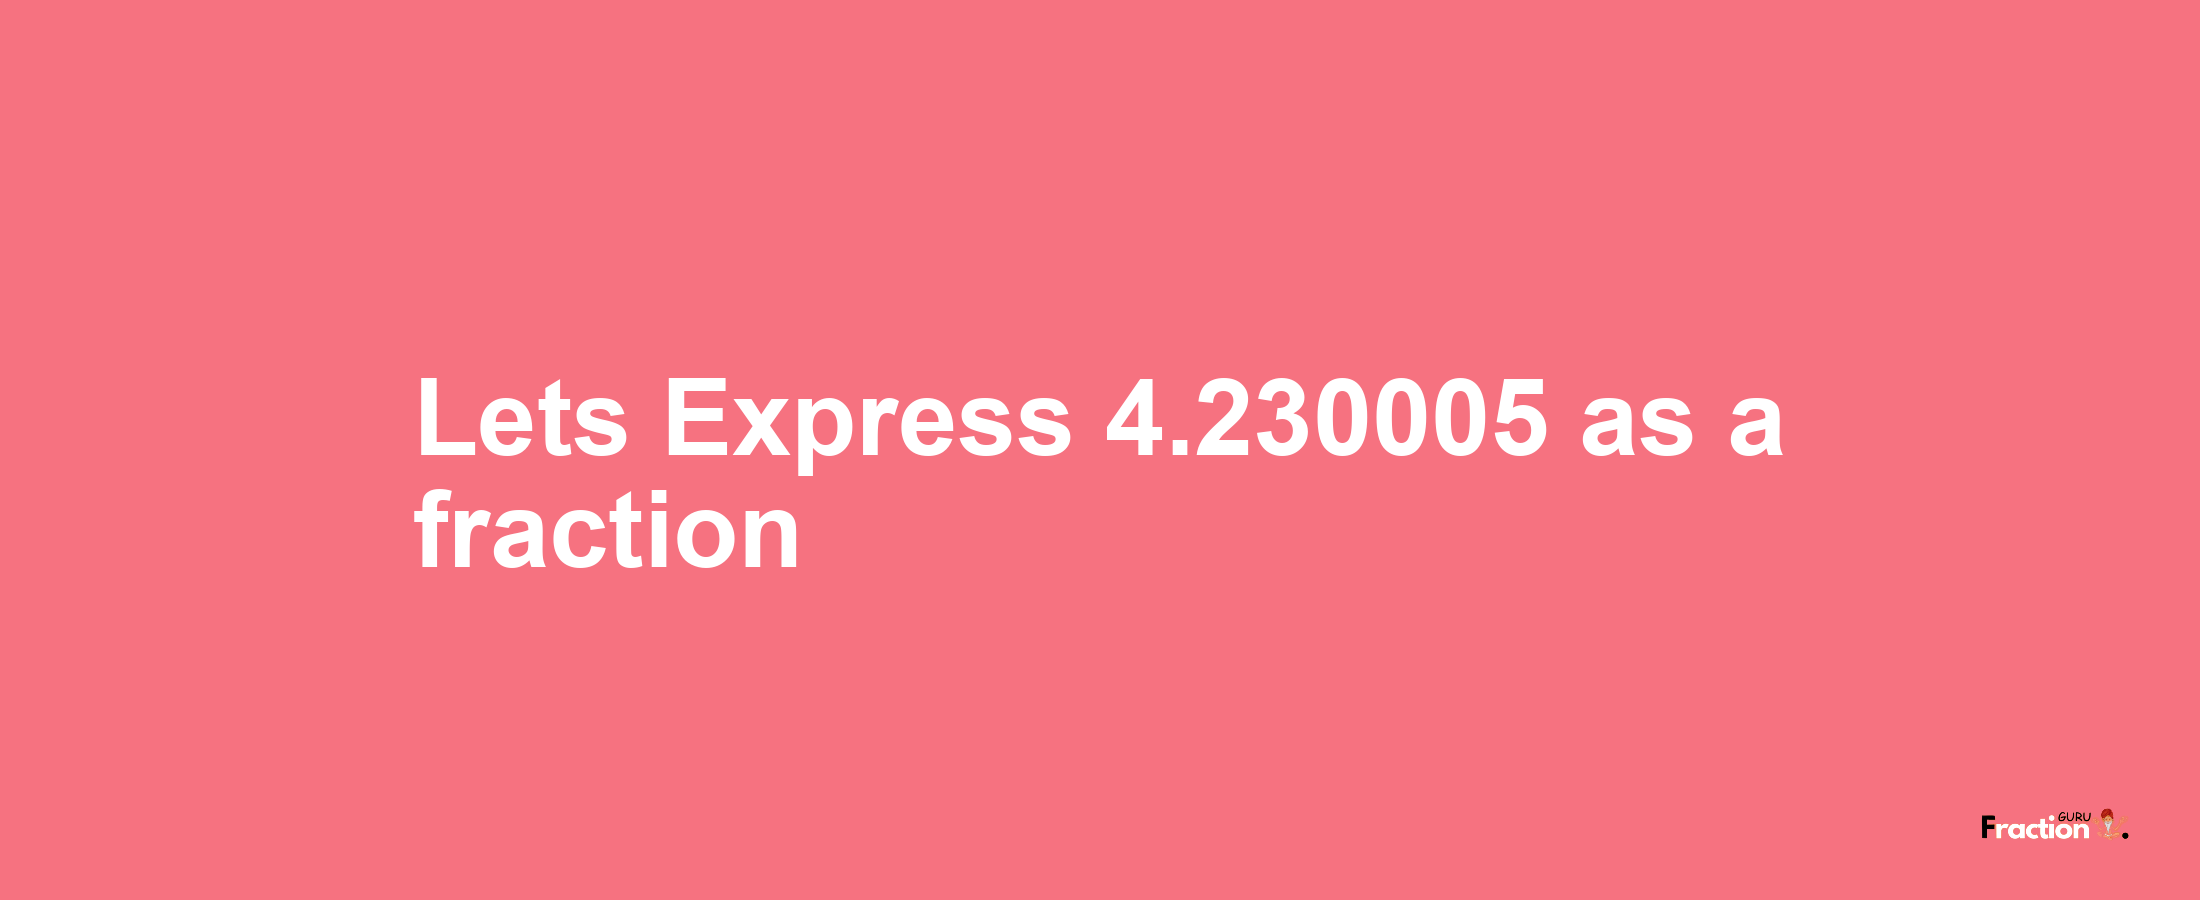 Lets Express 4.230005 as afraction